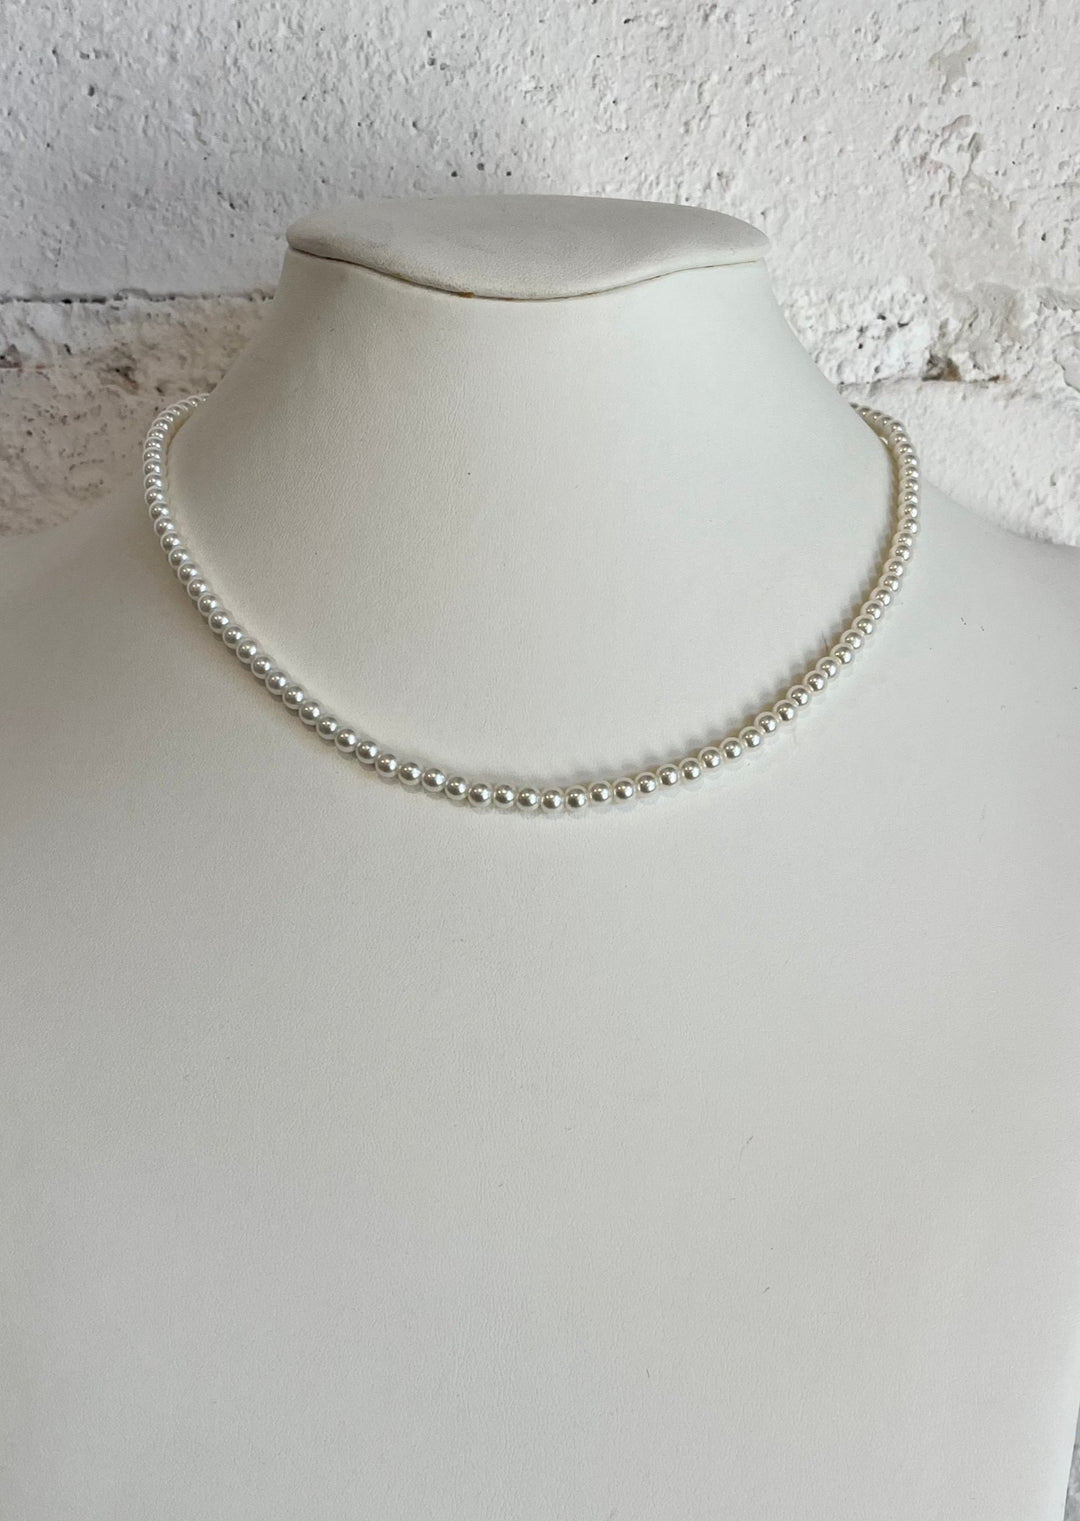 Gold Dipped 4MM Pearl Necklace, Jewelry, Adeline, Adeline, dallas boutique, dallas texas, texas boutique, women's boutique dallas, adeline boutique, dallas boutique, trendy boutique, affordable boutique